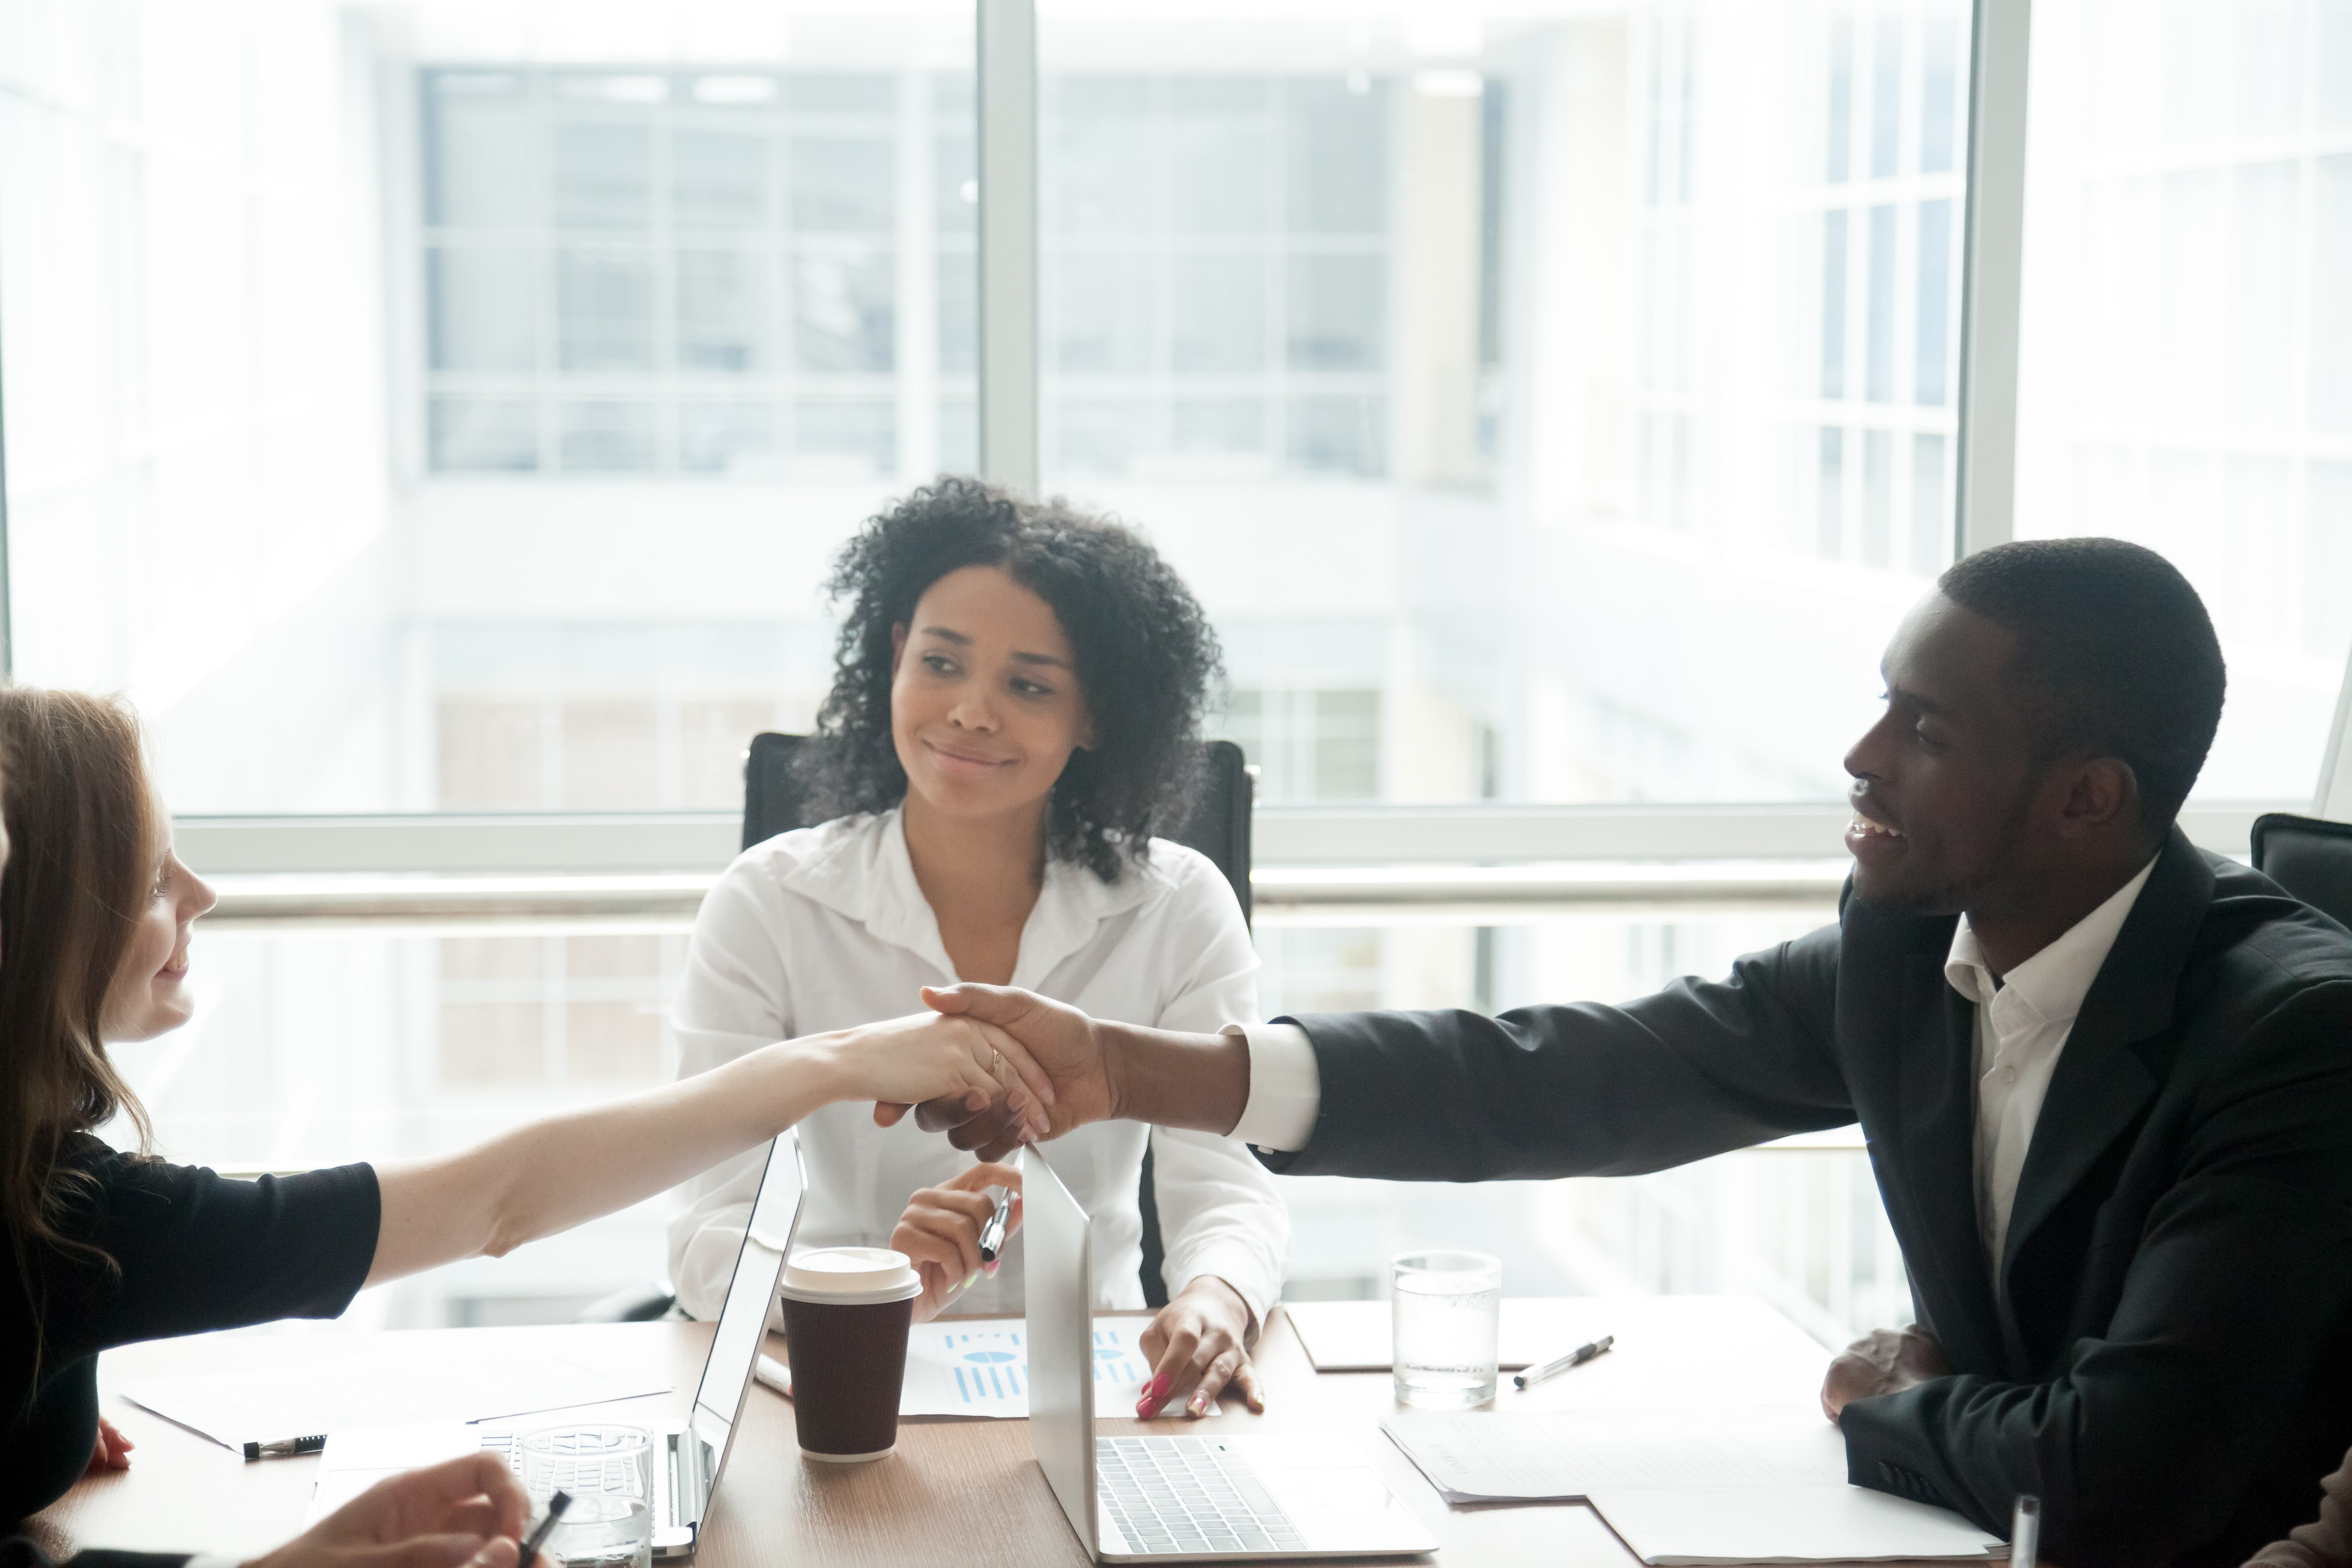 Manager using conflict resolution skills to help employees come to an agreement